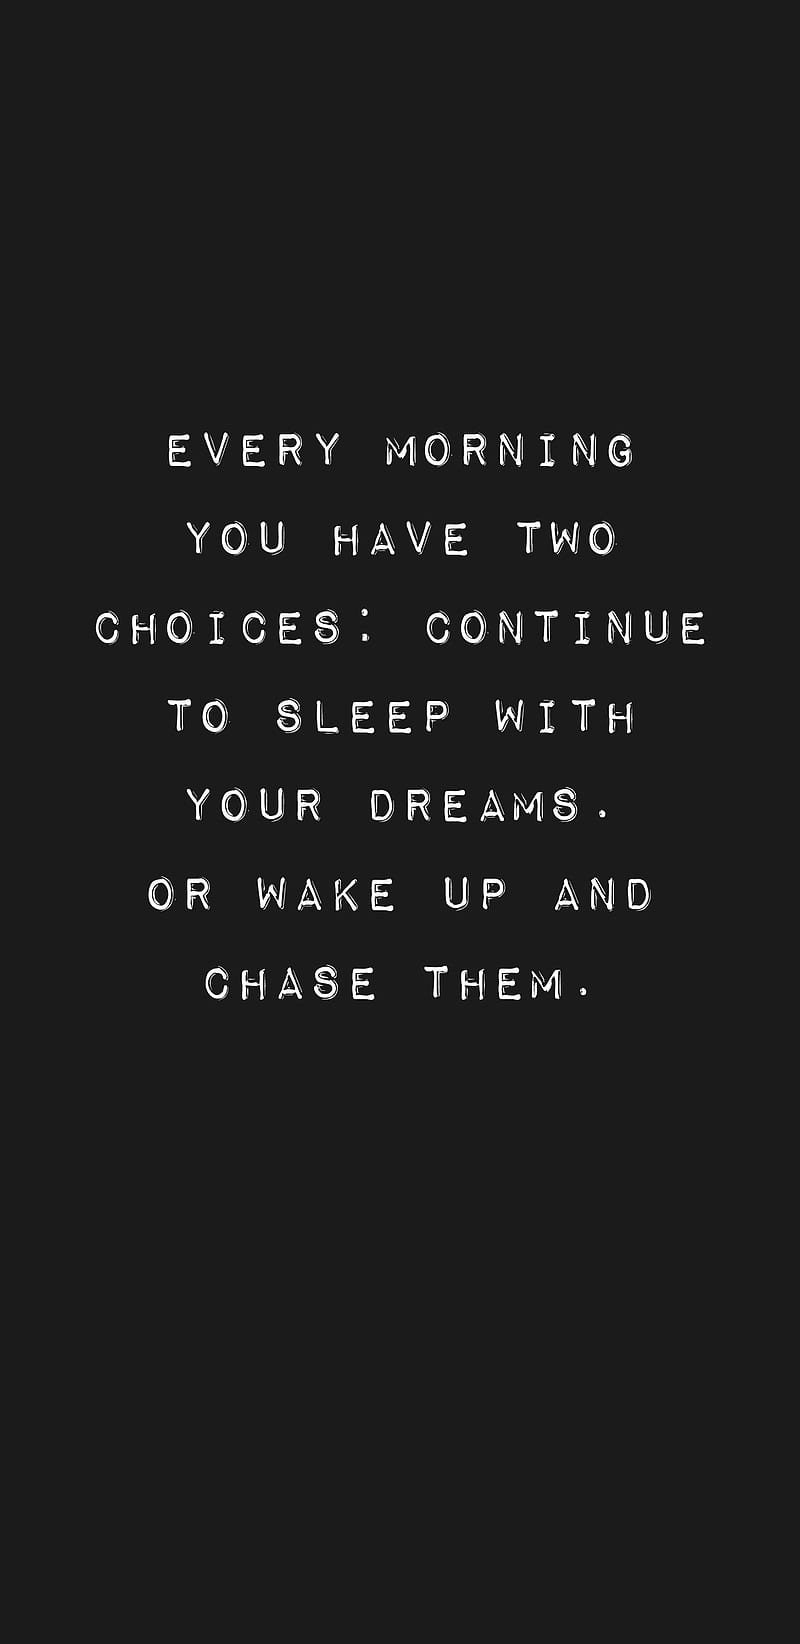 Follow Your Dreams Quotes To Inspire You To Chase Them